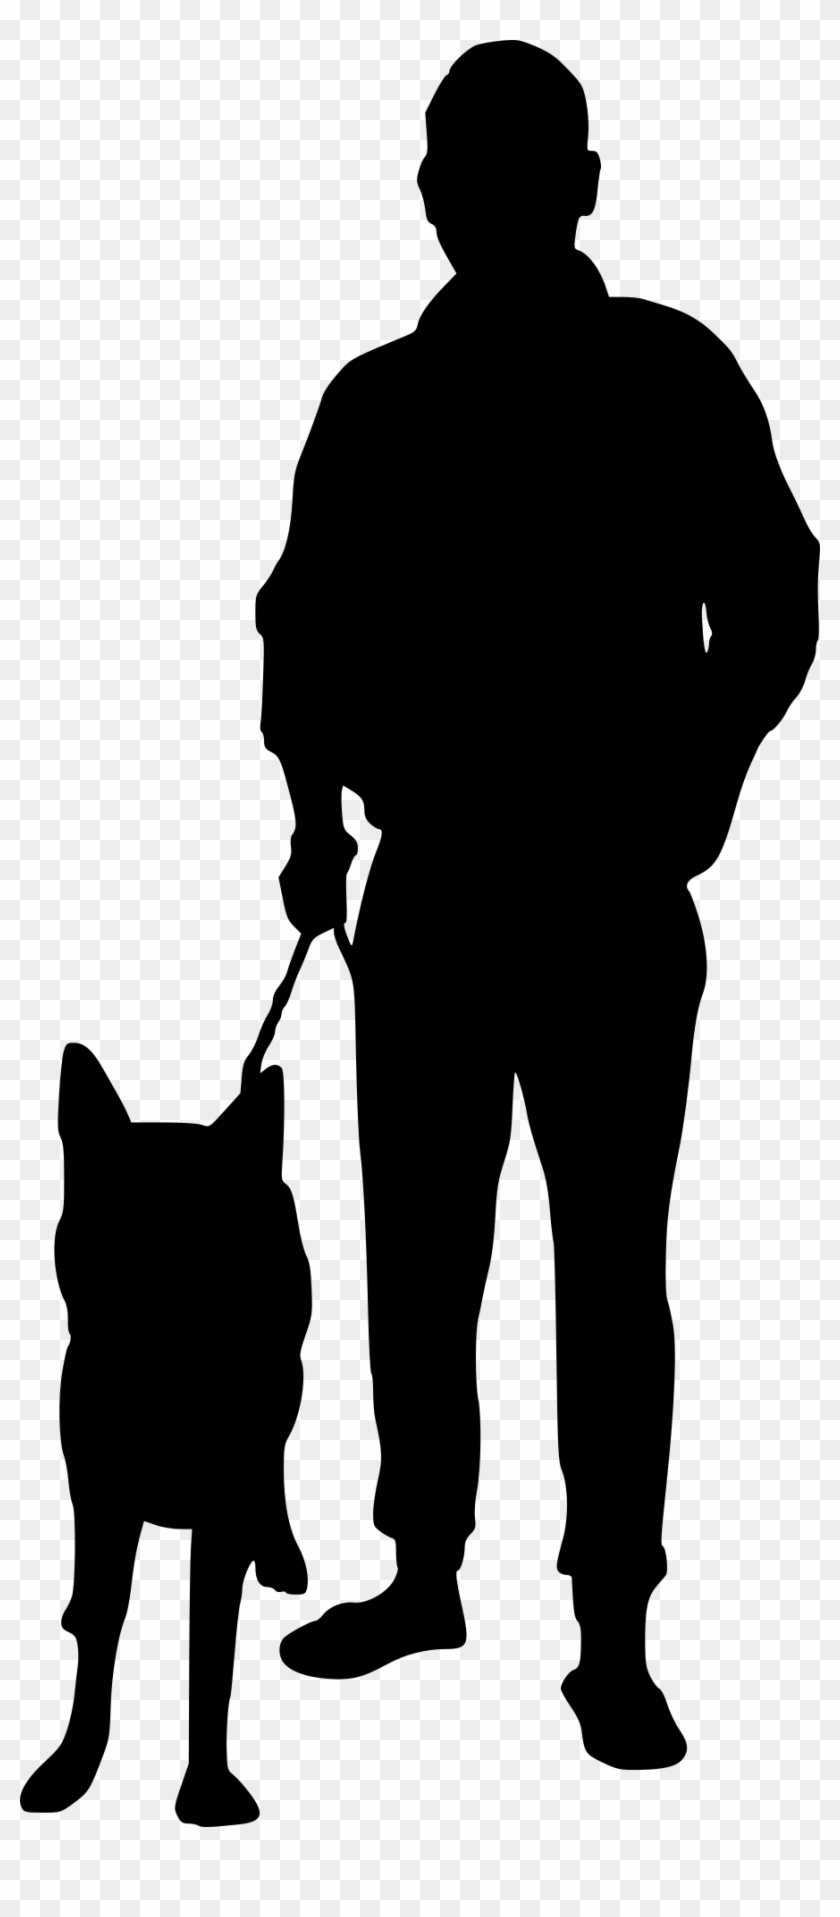 Png File Size - Dog Walking Silhouette Png Clipart #16615